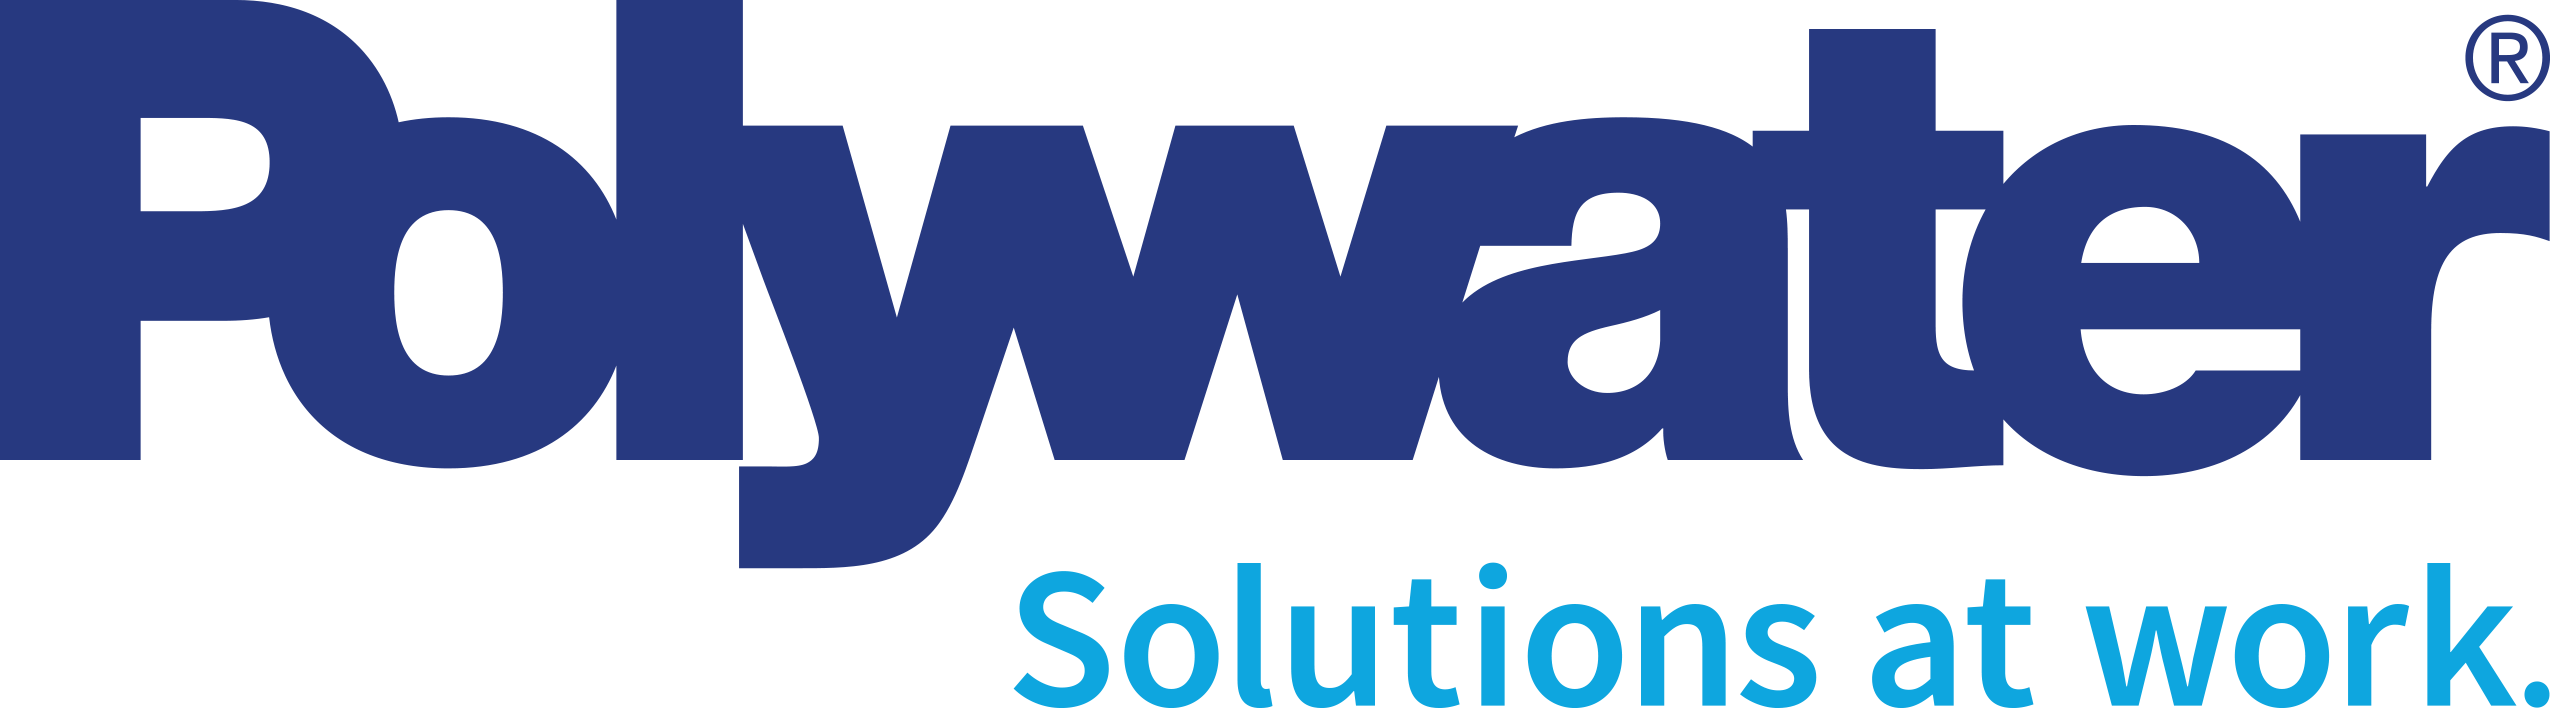 Polywater Solutions